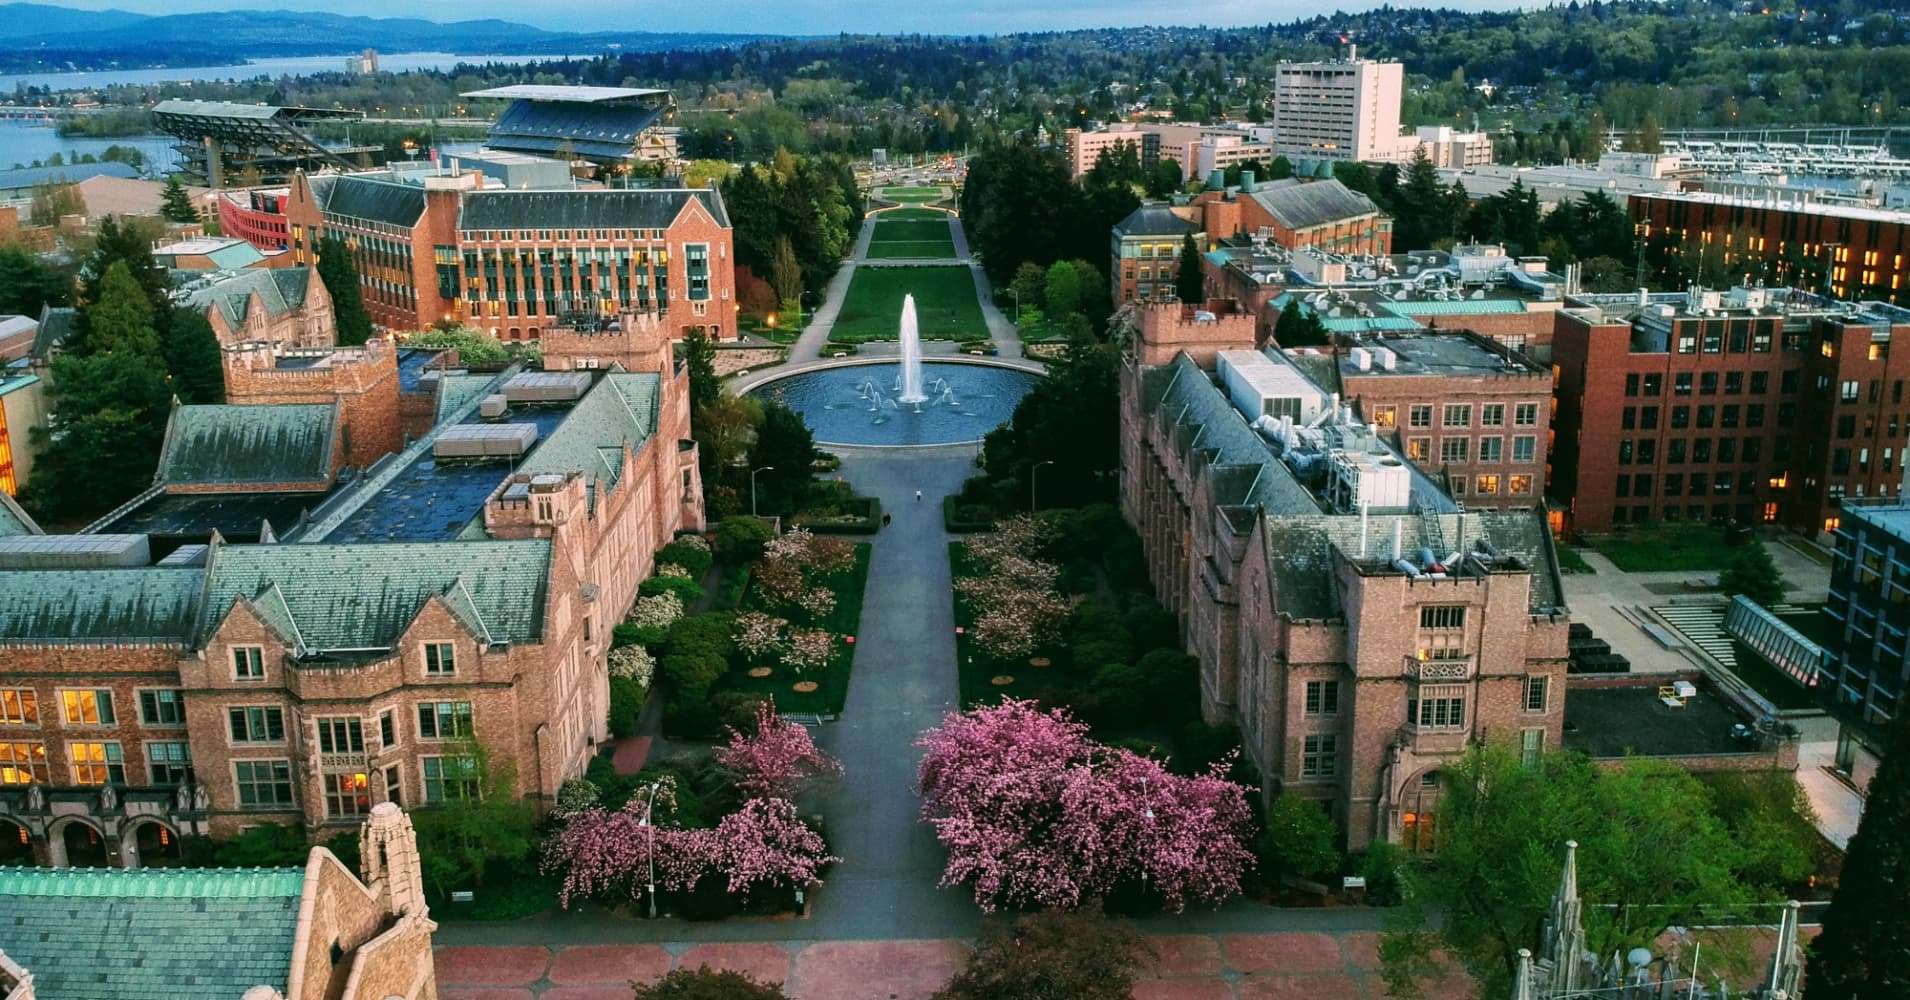 U.S. News: These are the 10 best universities in the world